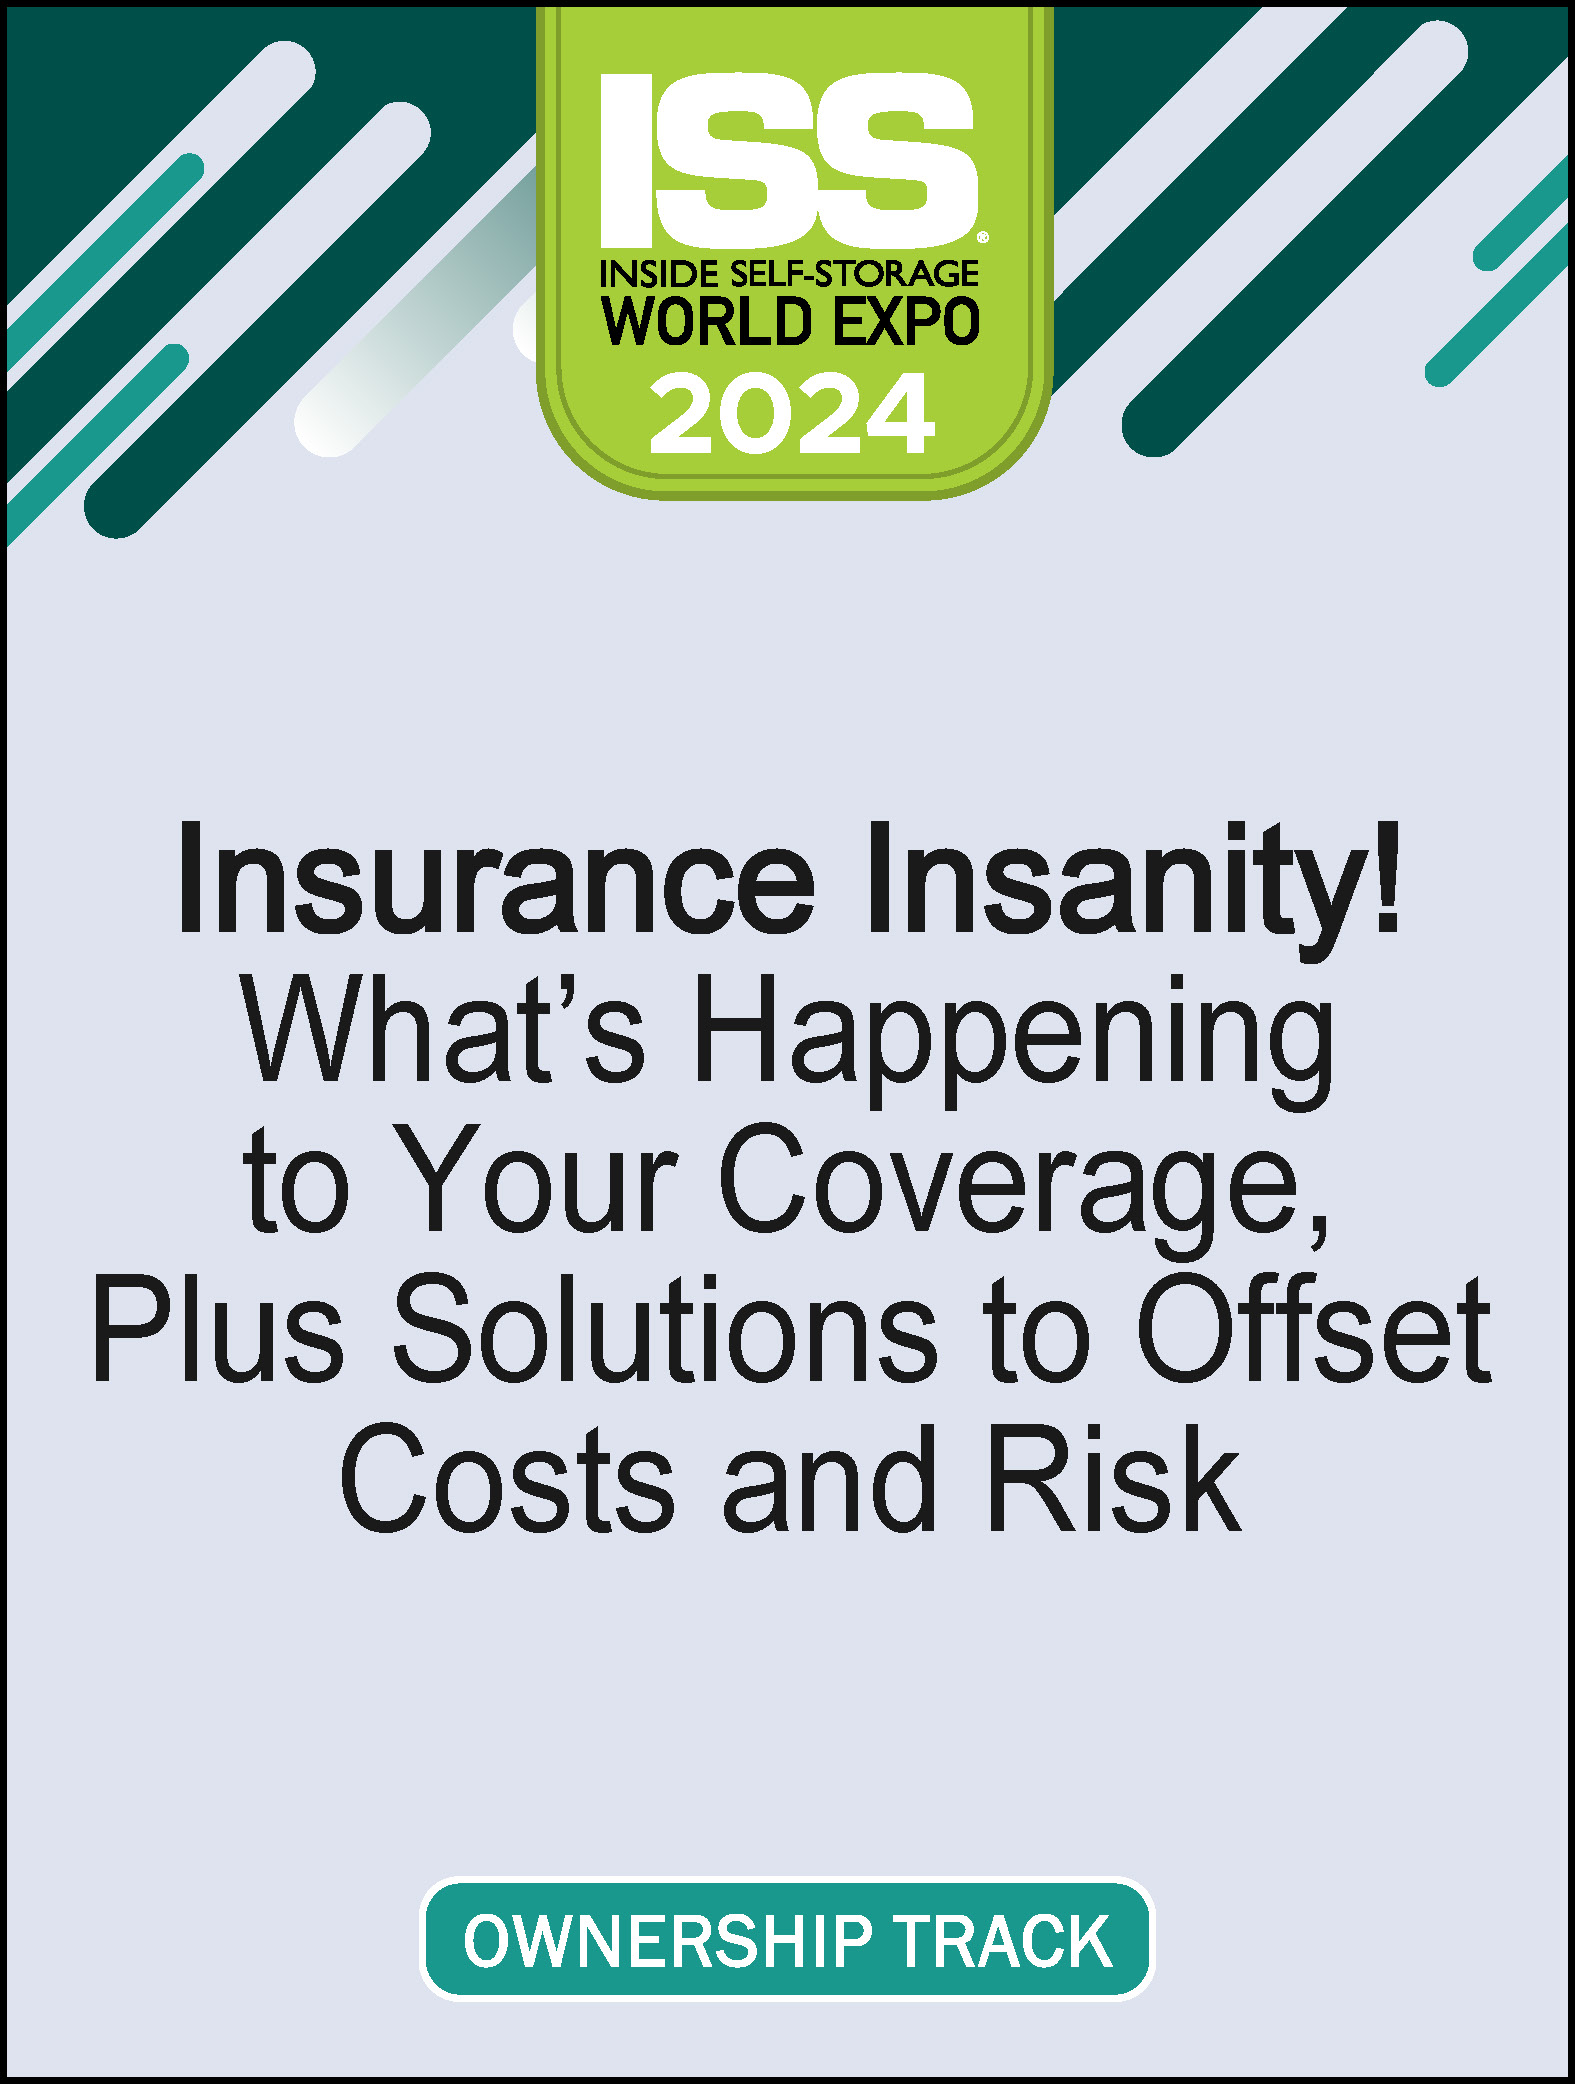 Video Pre-Order - Insurance Insanity! What’s Happening to Your Coverage, Plus Solutions to Offset Costs and Risk